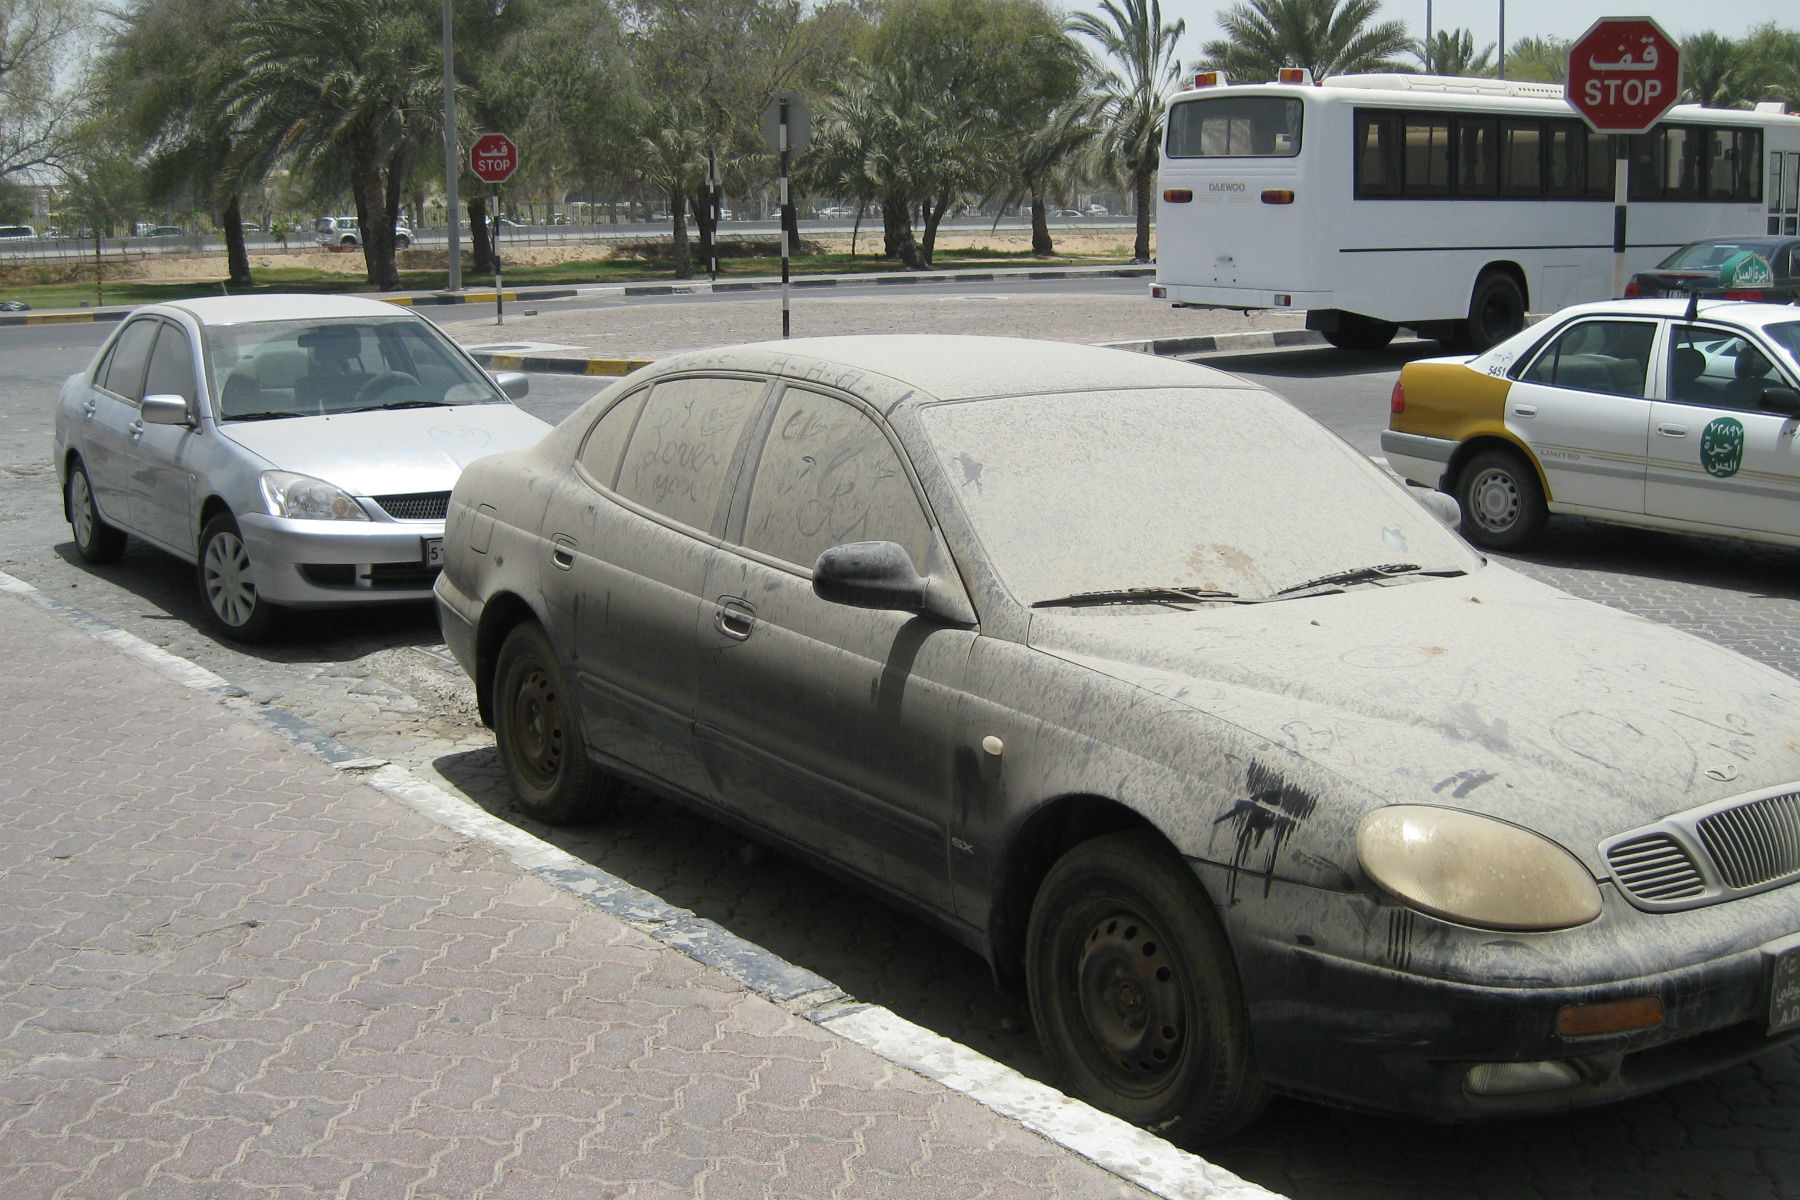 Abu Dhabi officials are towing away dirty cars because they're an eyesore